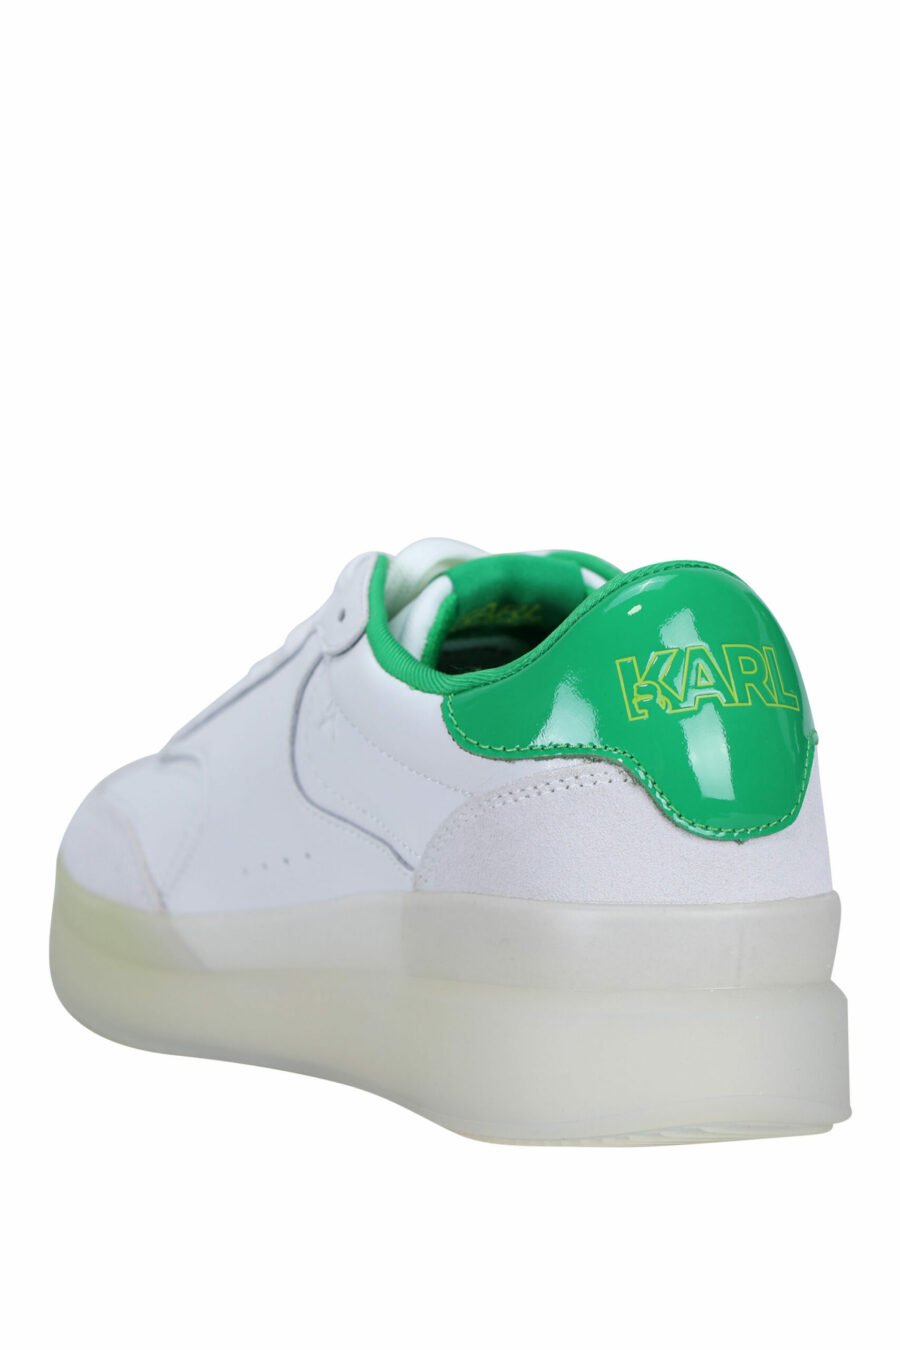 White and grey "brink" trainers with green details - 5059529294495 3 scaled